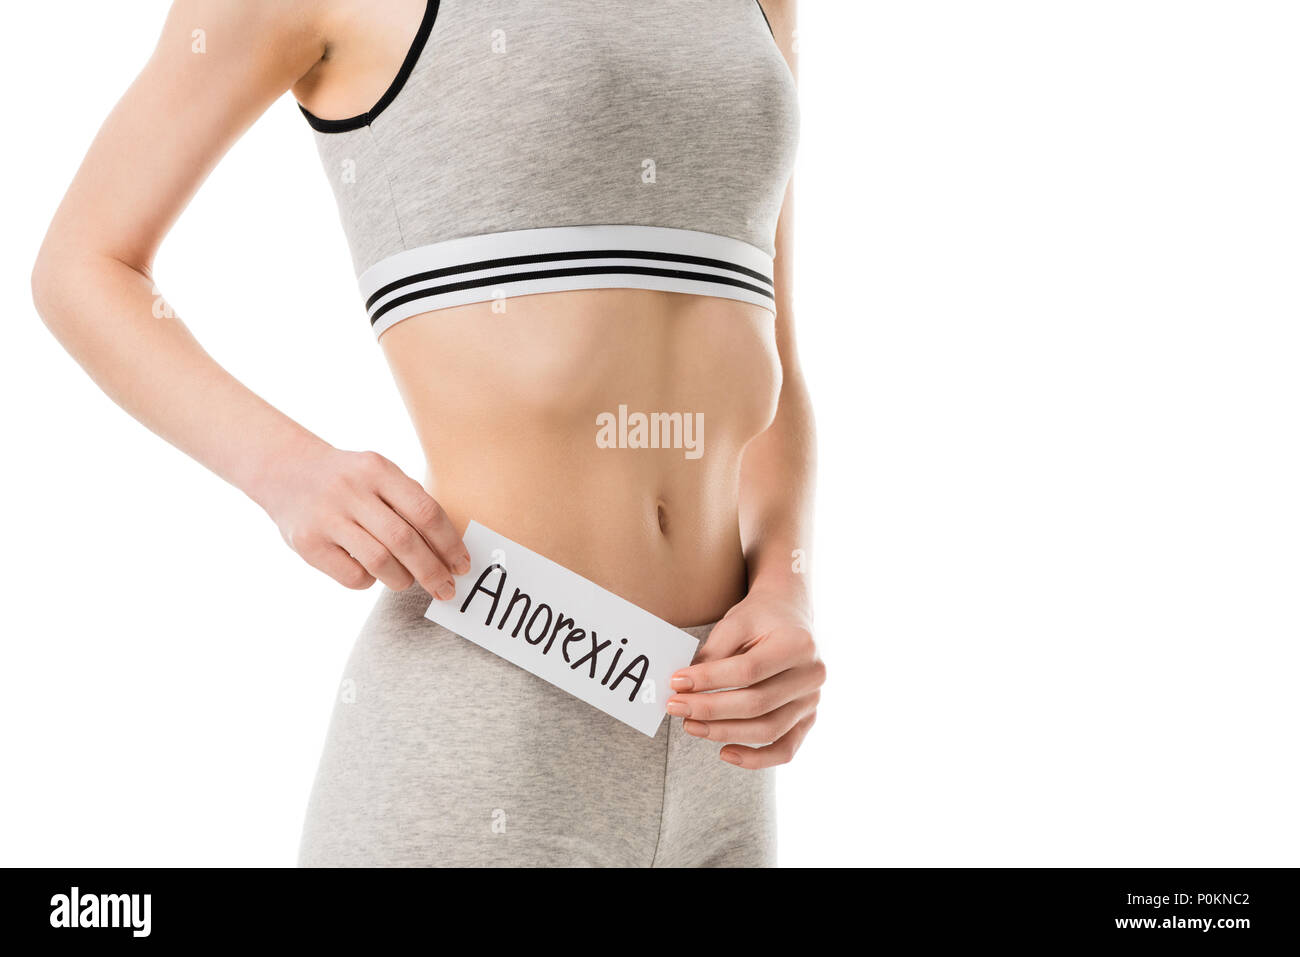 Female with slim waist, weight loss, anorexia Stock Photo - Alamy